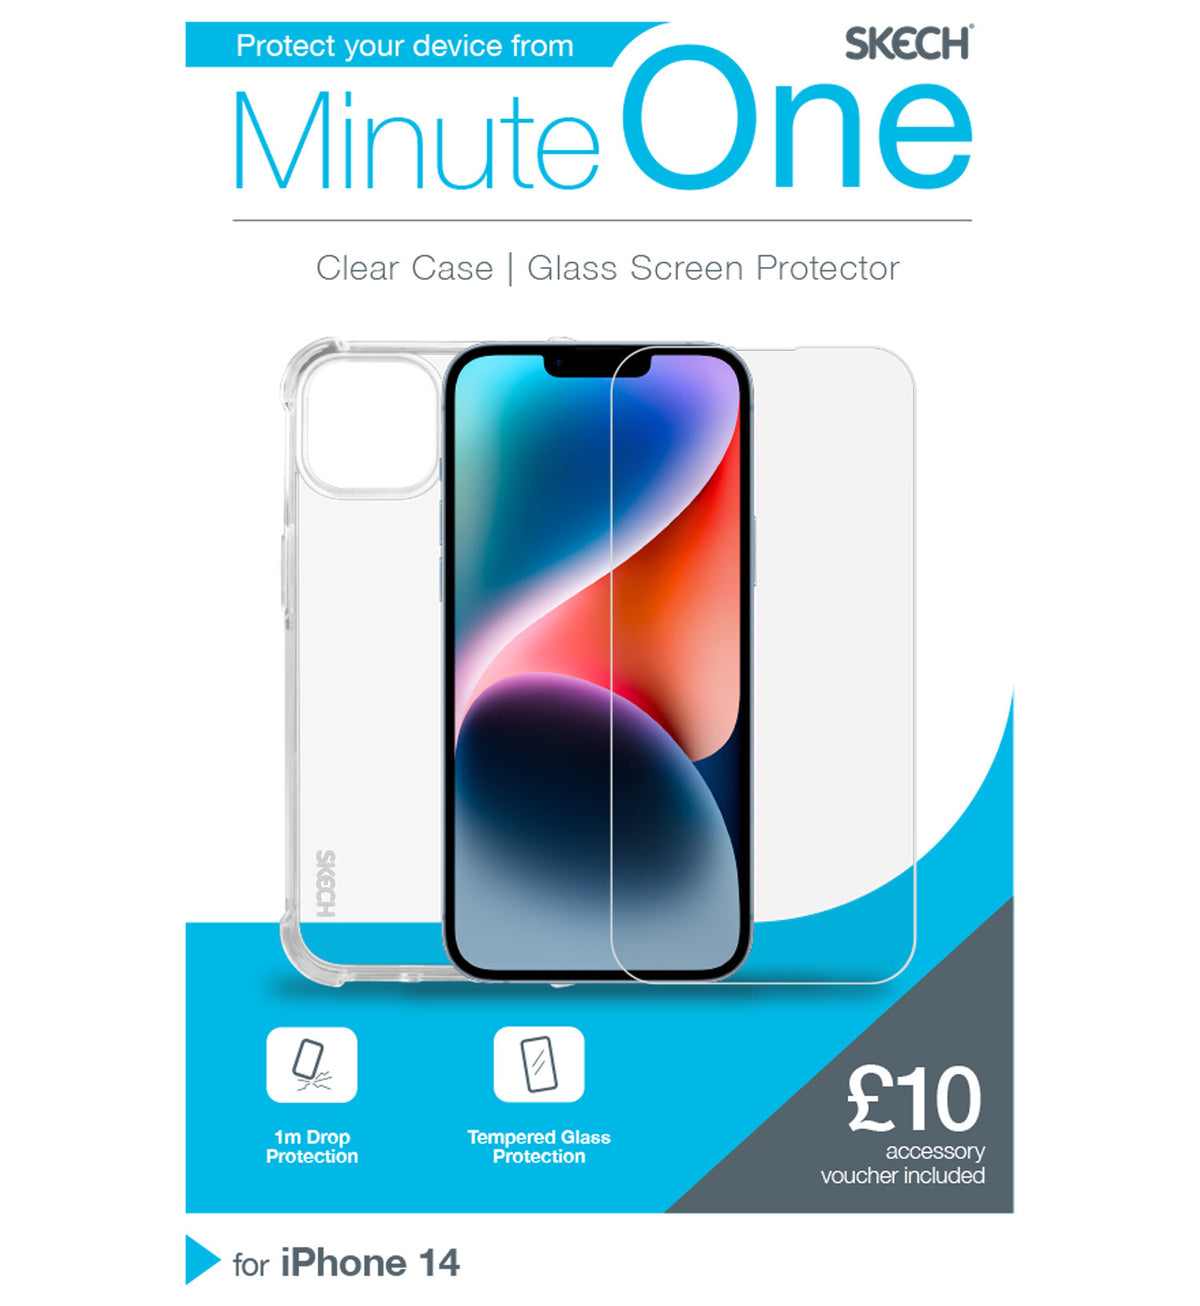 Skech Minute One Bundle for iPhone 14